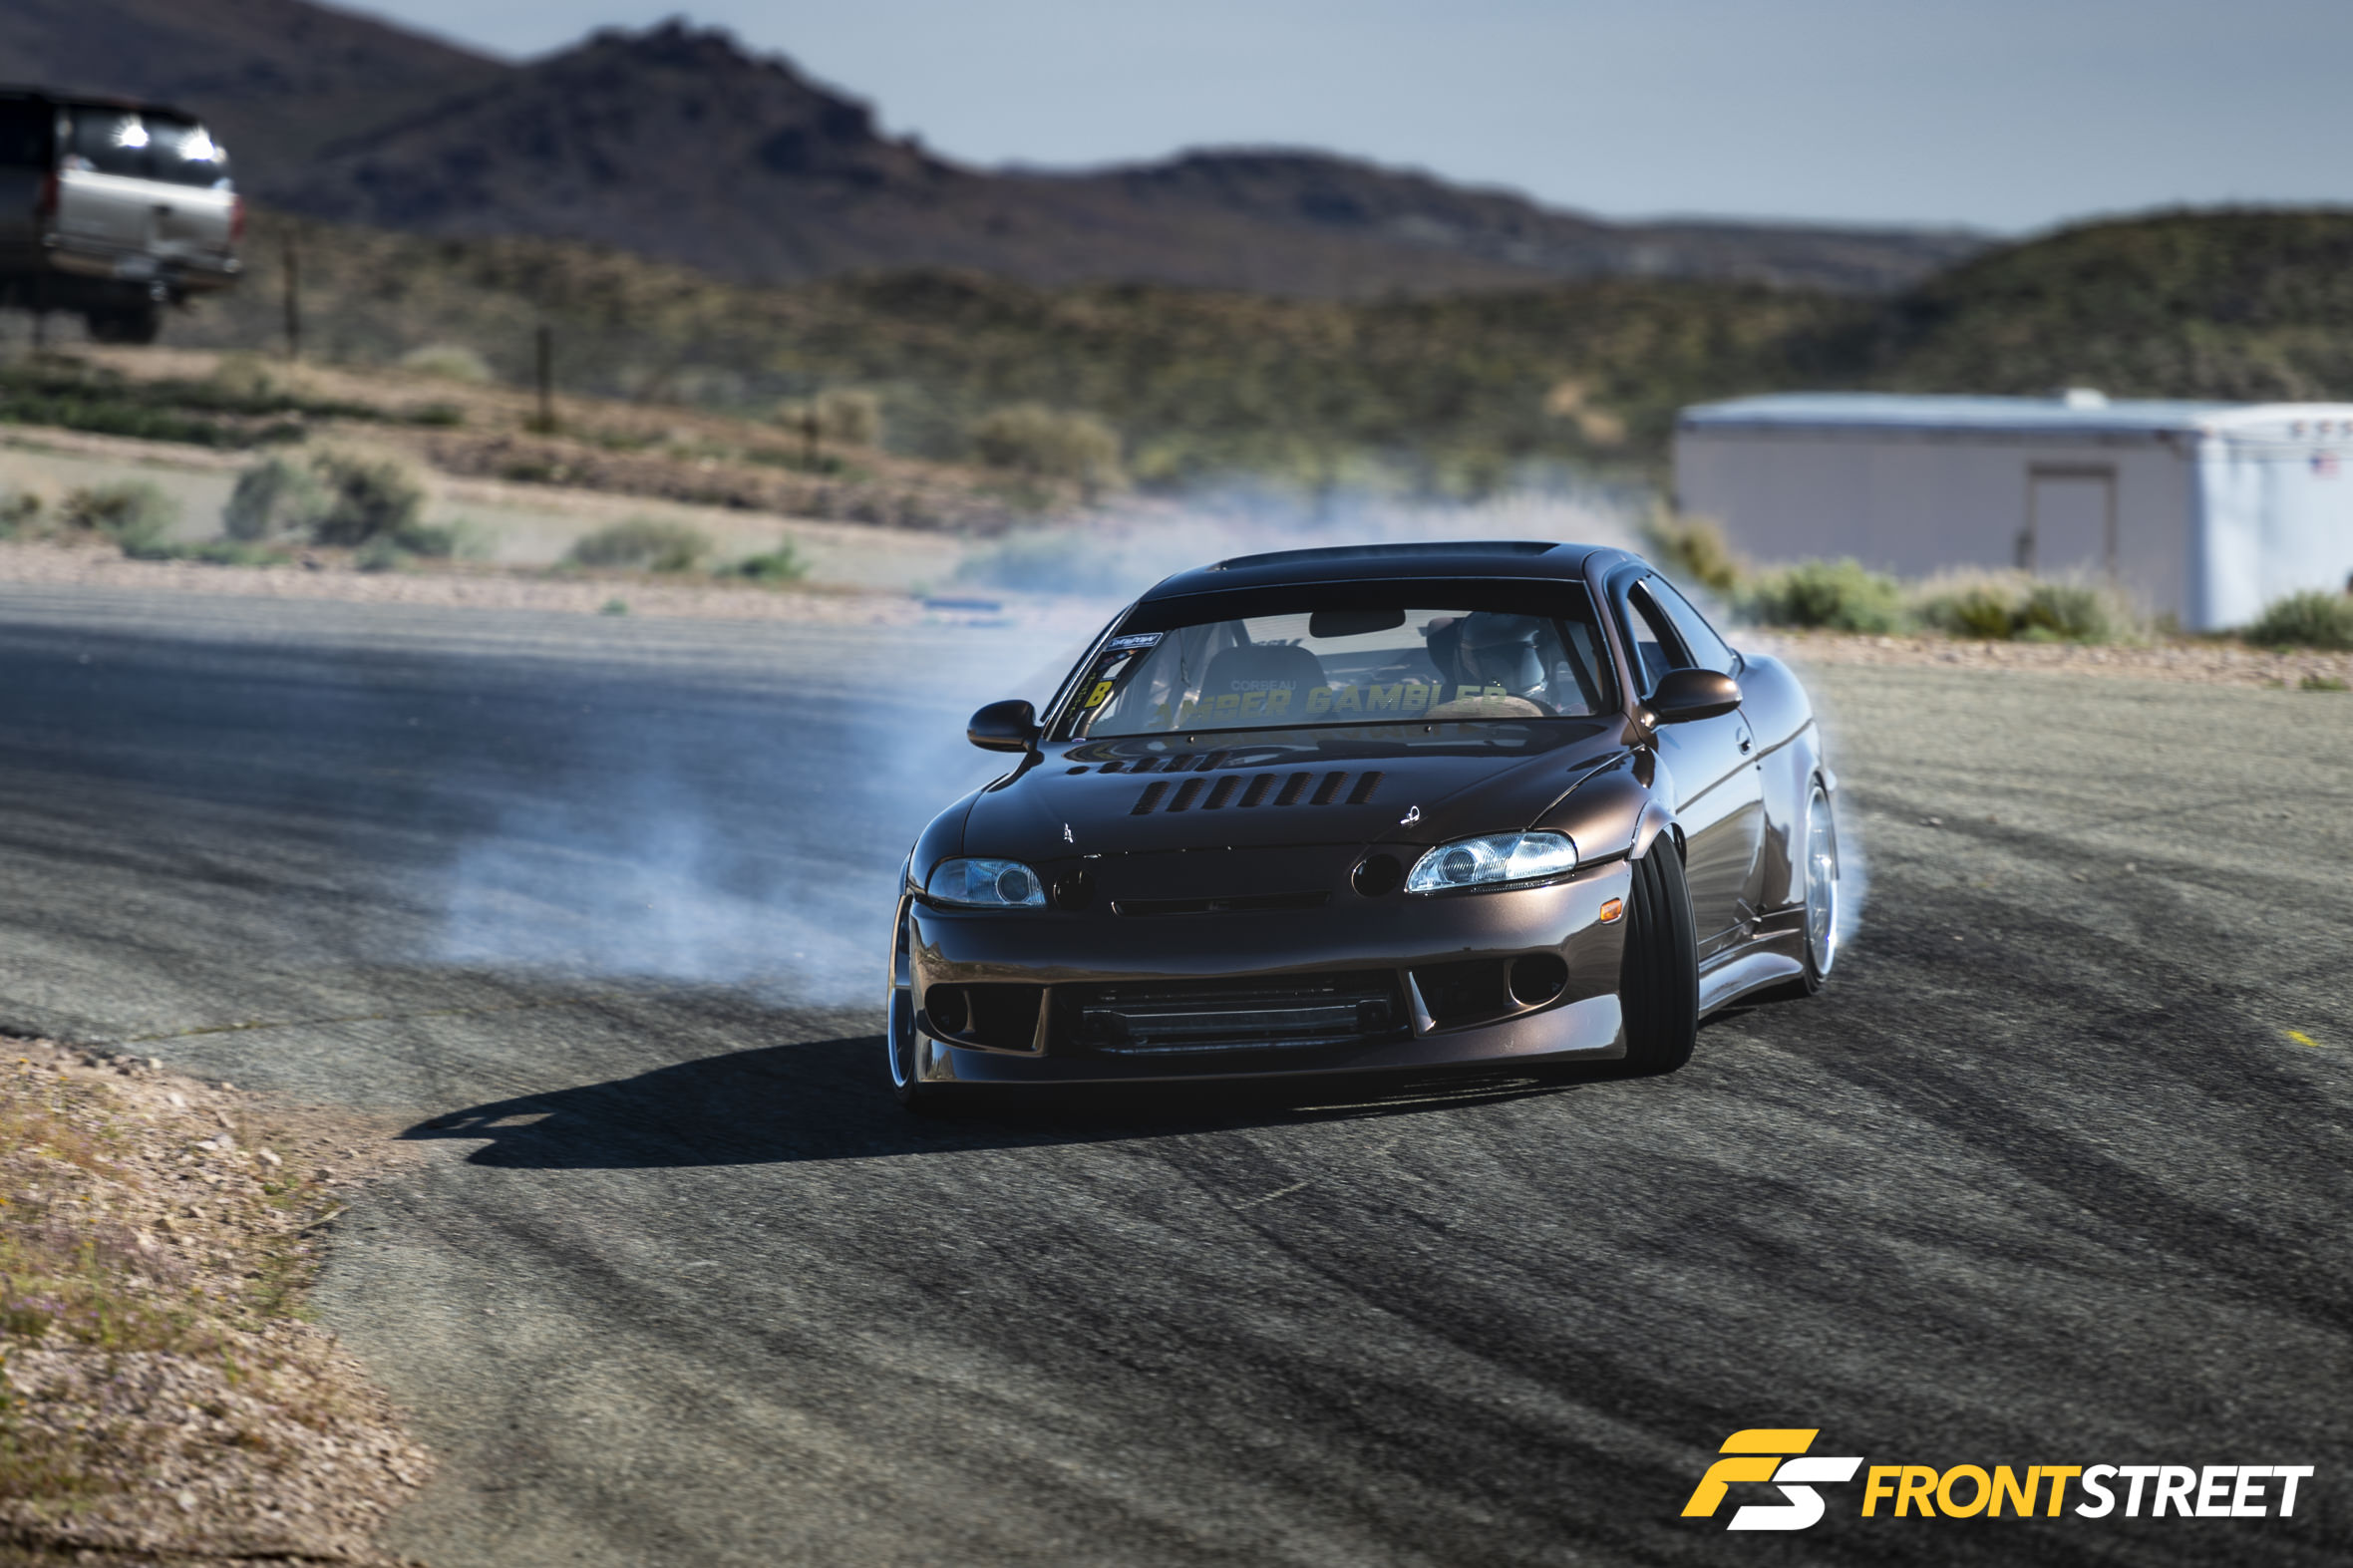 SoCal’s Jimmy Up Matsuri Welcomes Grassroots Drifting With A Twist